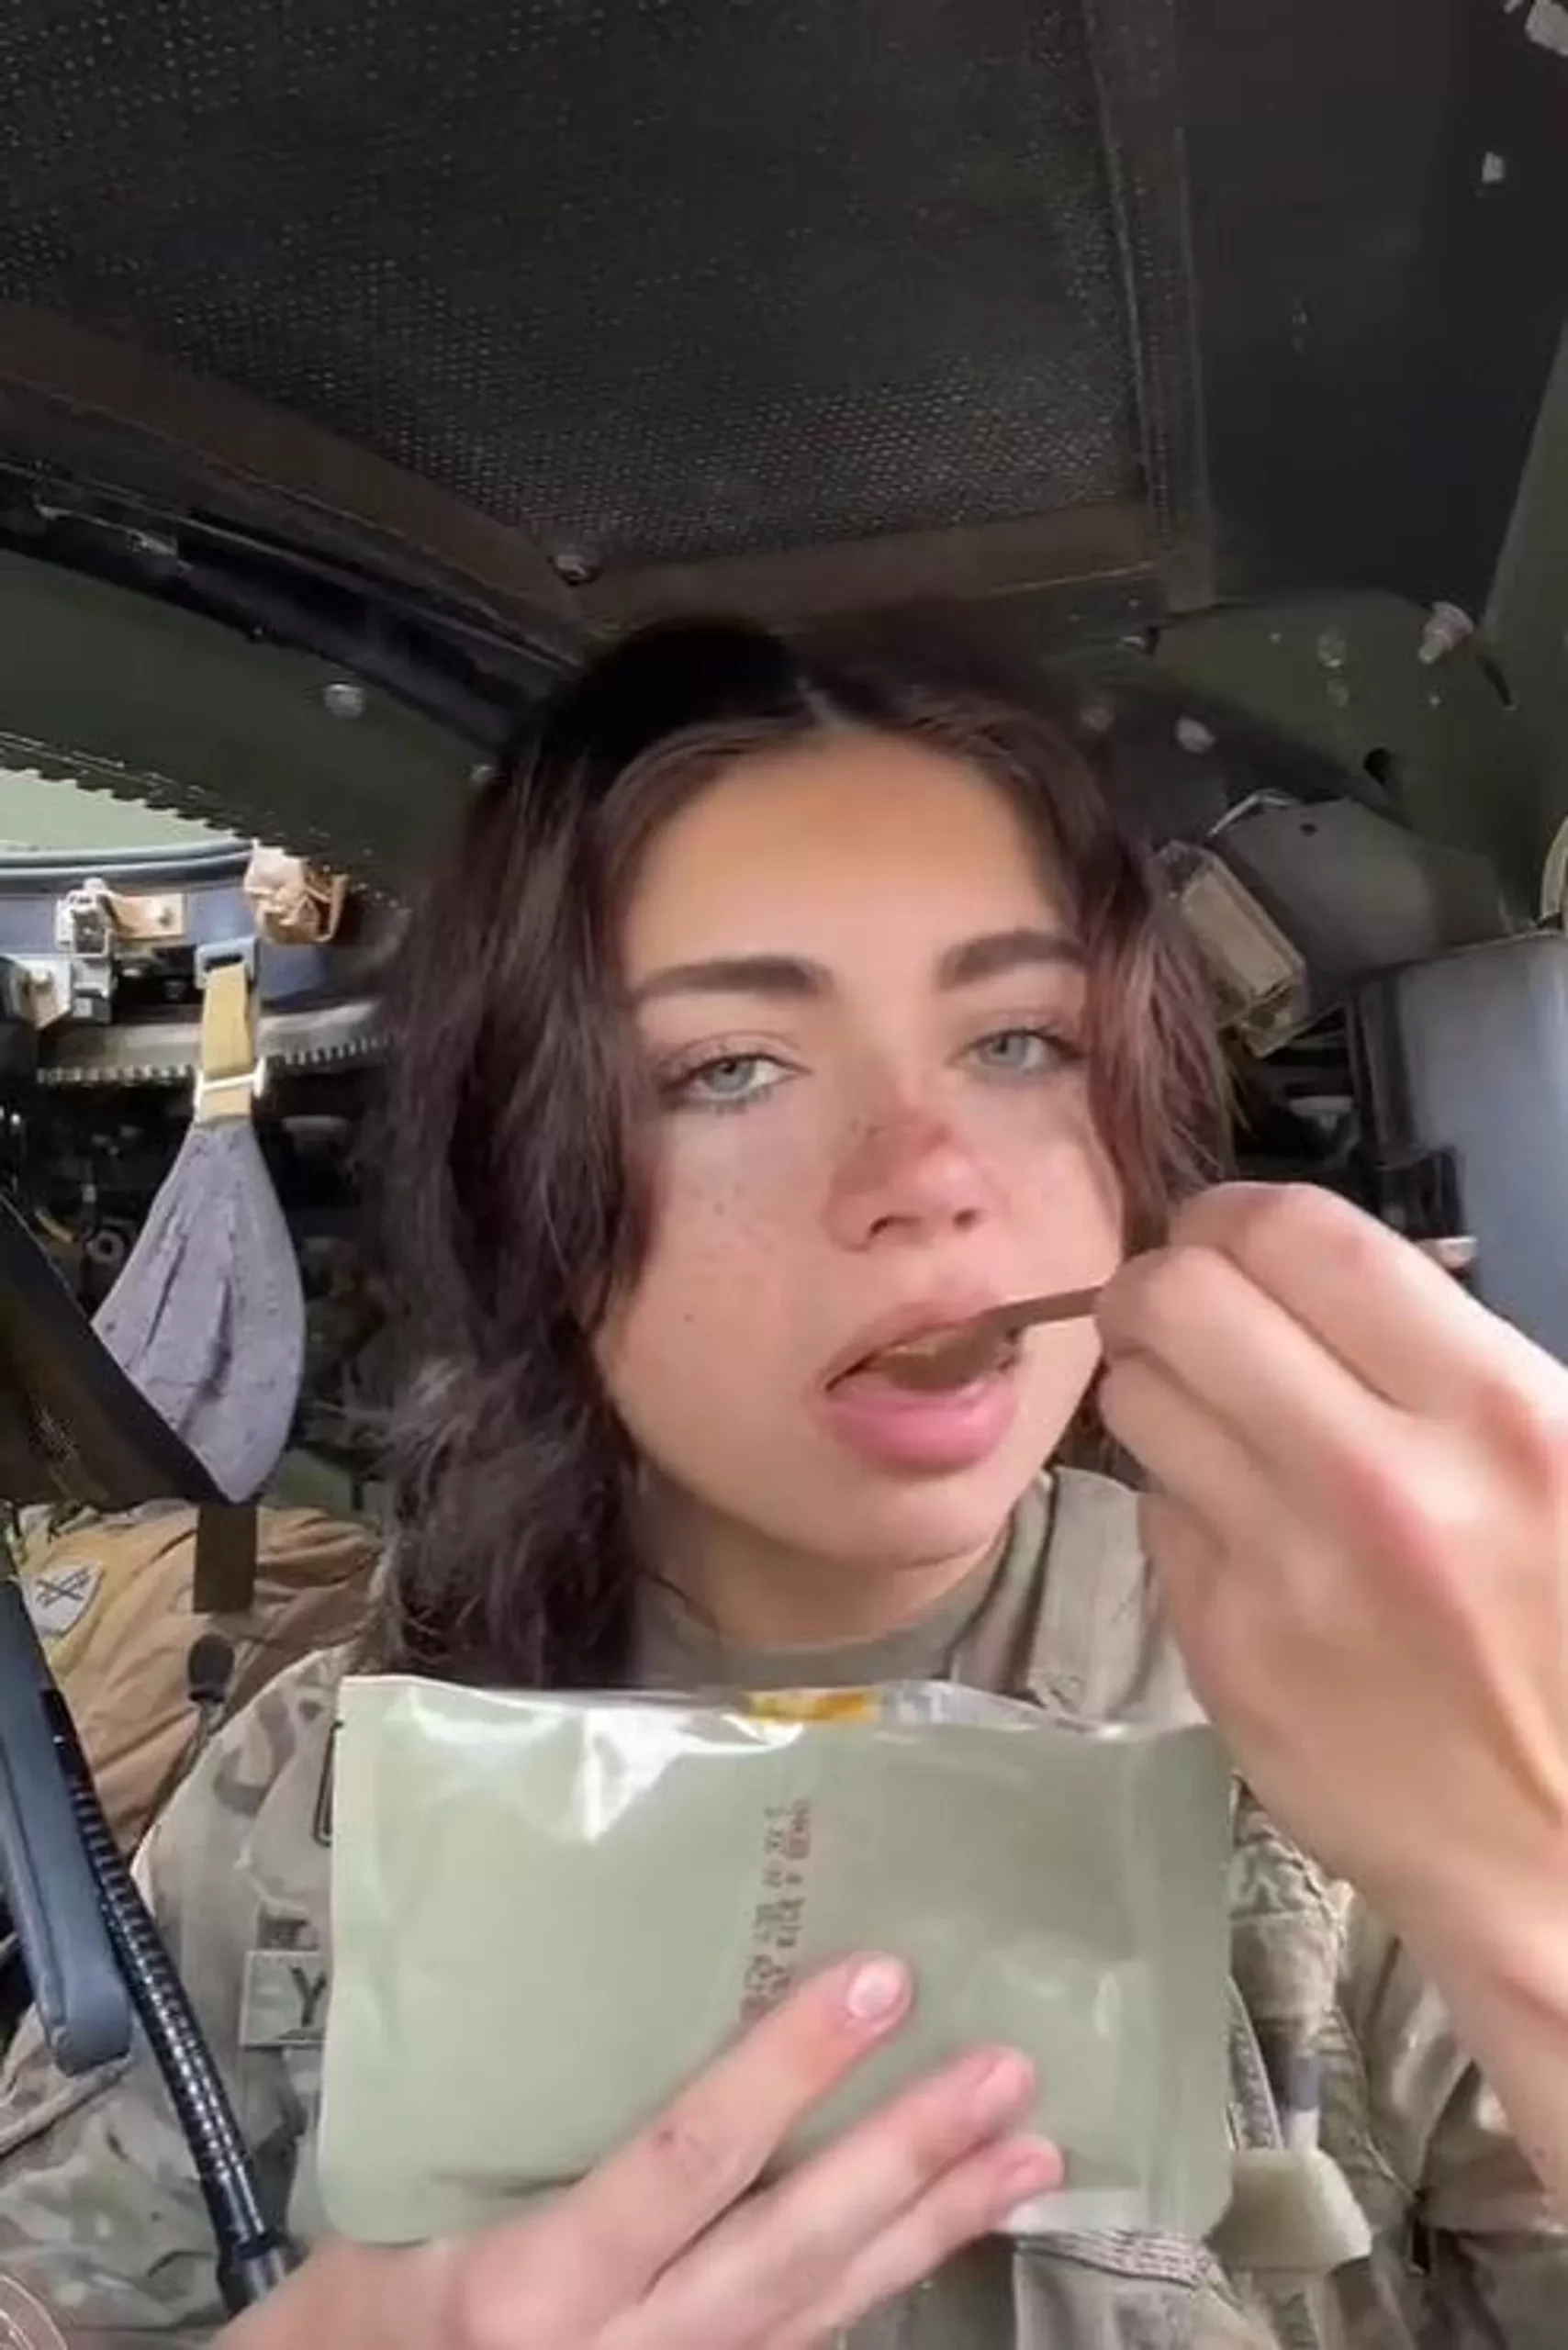 US Admits Problems Recruiting Soldiers: Is Army Now Turning to Influencers?